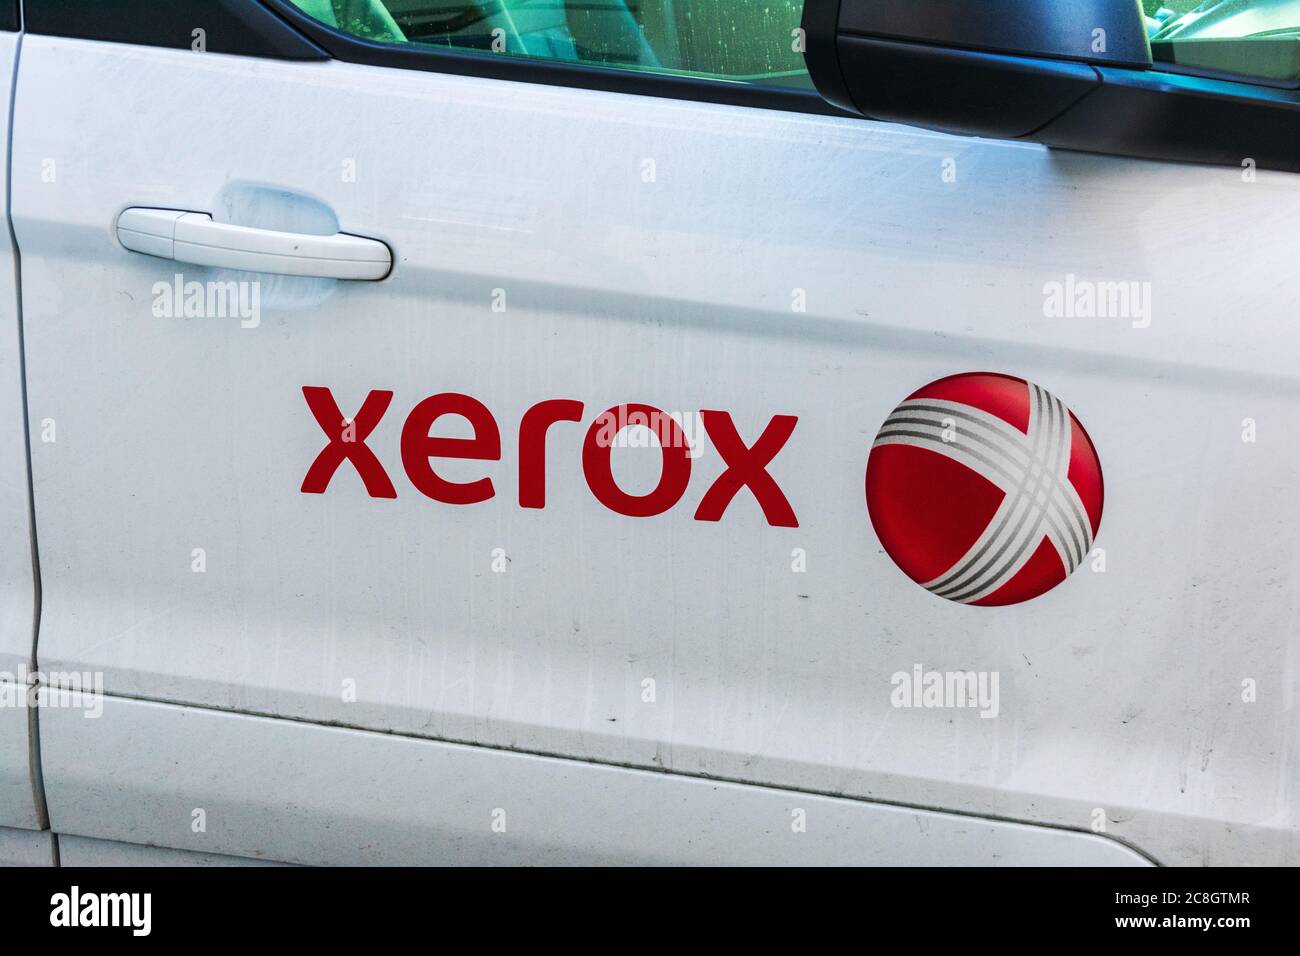 Xerox sign and logo on the door of service vehicle parked at client location - San Francisco, California, USA - 2020 Stock Photo